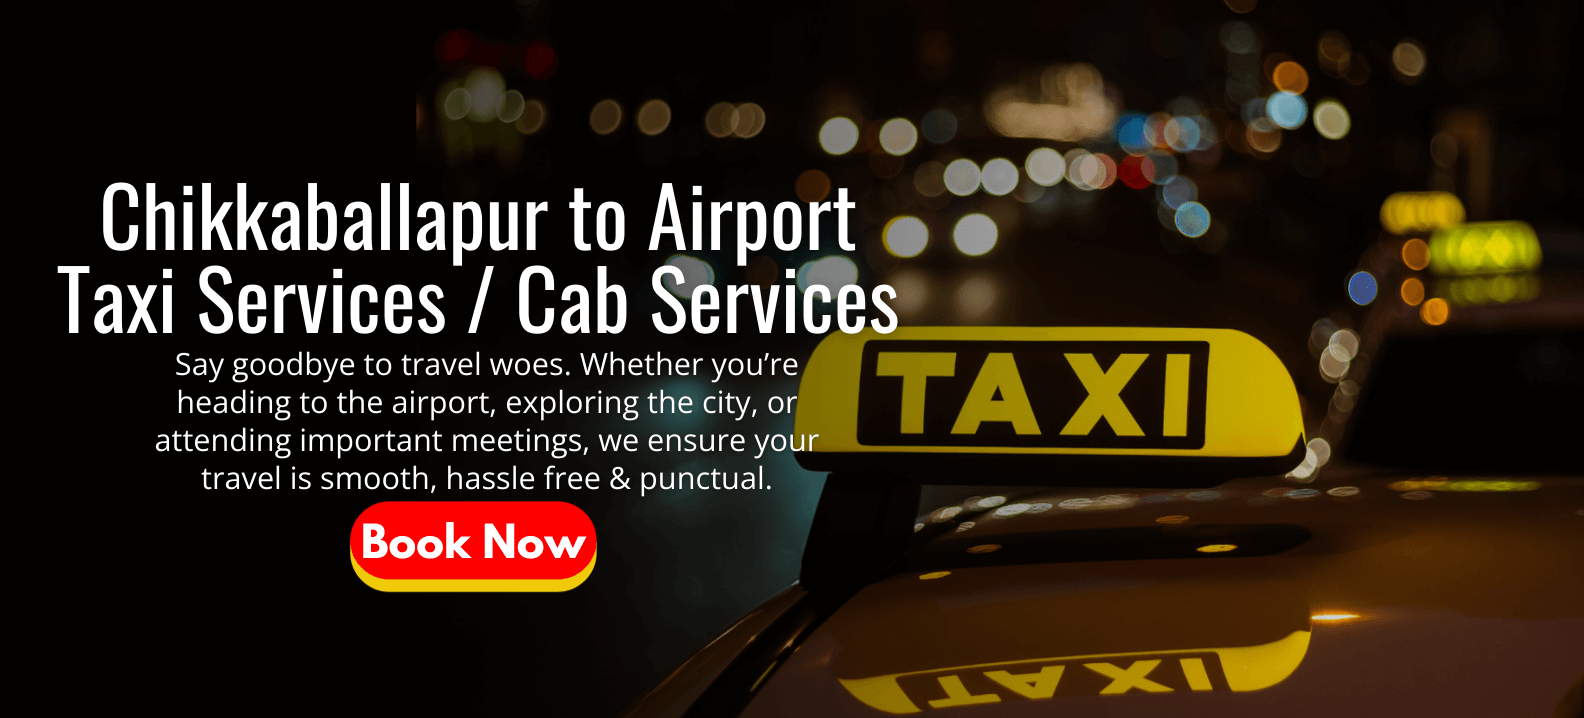 Chikkaballapur to Airport Taxi Services Cab Services